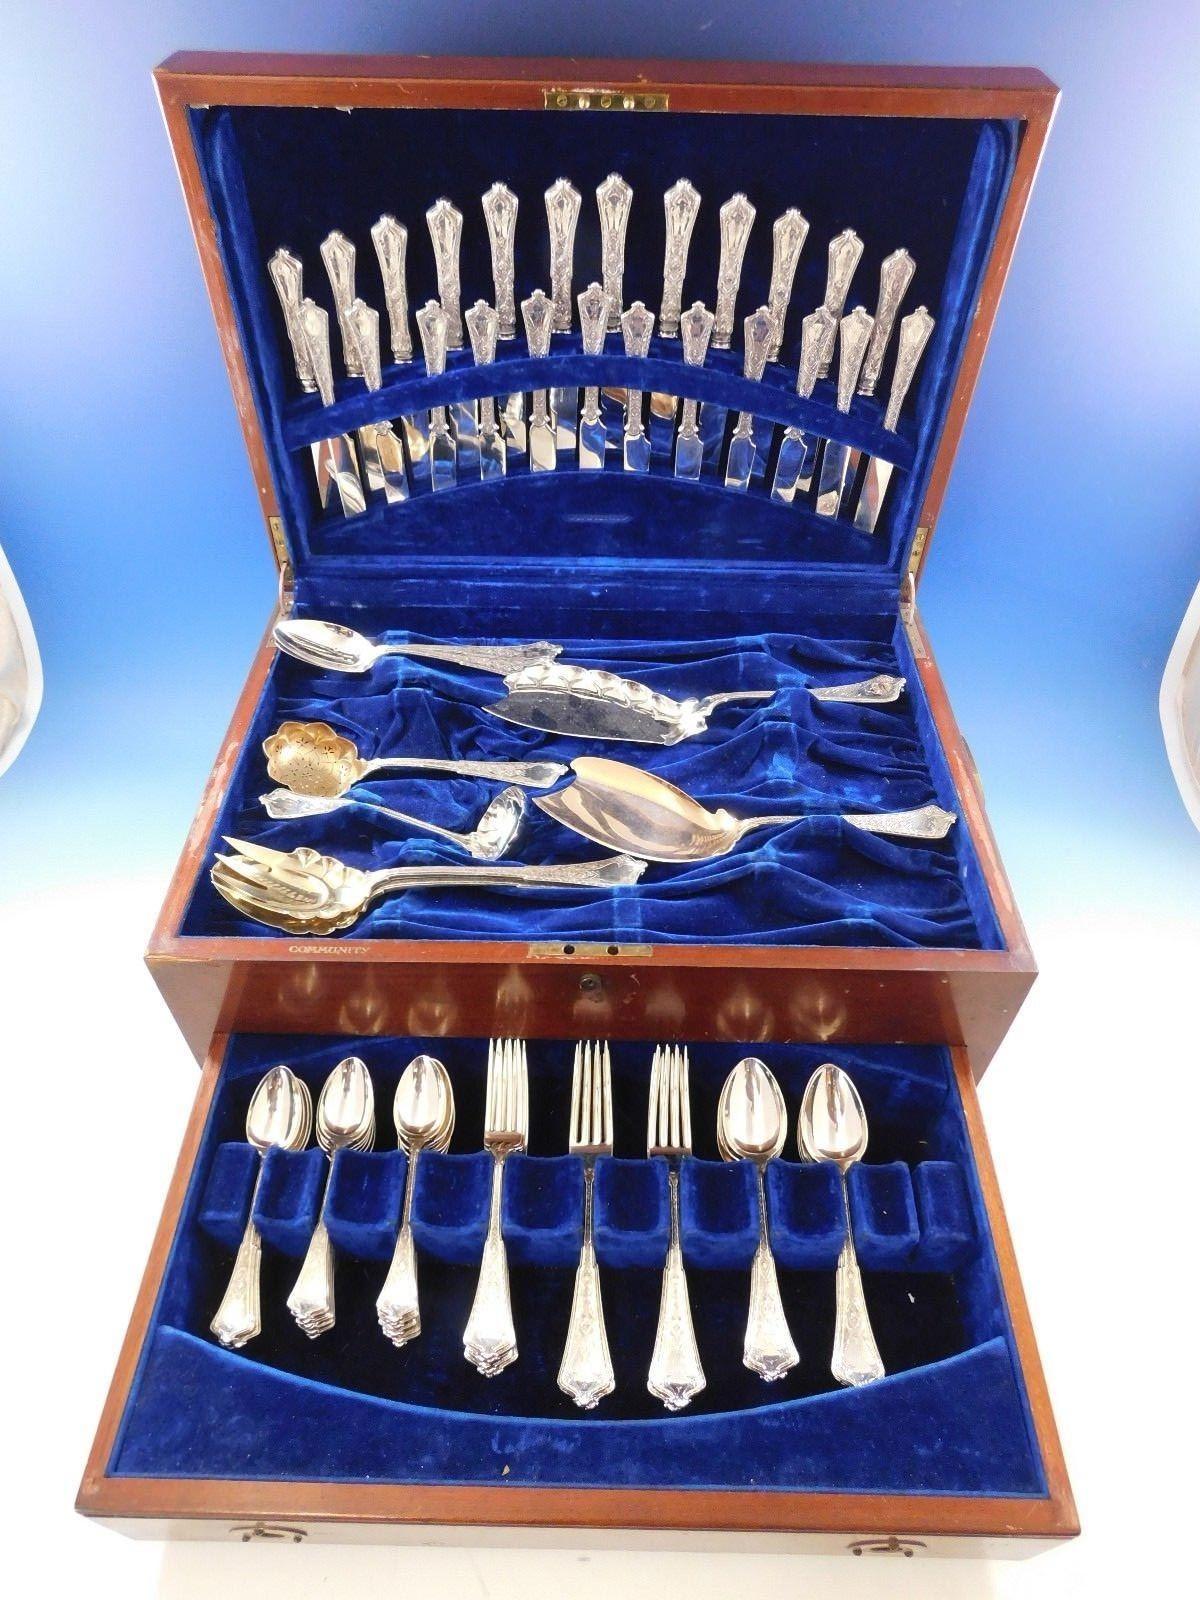 Stunning Persian by Tiffany and Co. sterling silver flatware set of 92 pieces. This set includes:

12 Dinner knives, 9 1/4